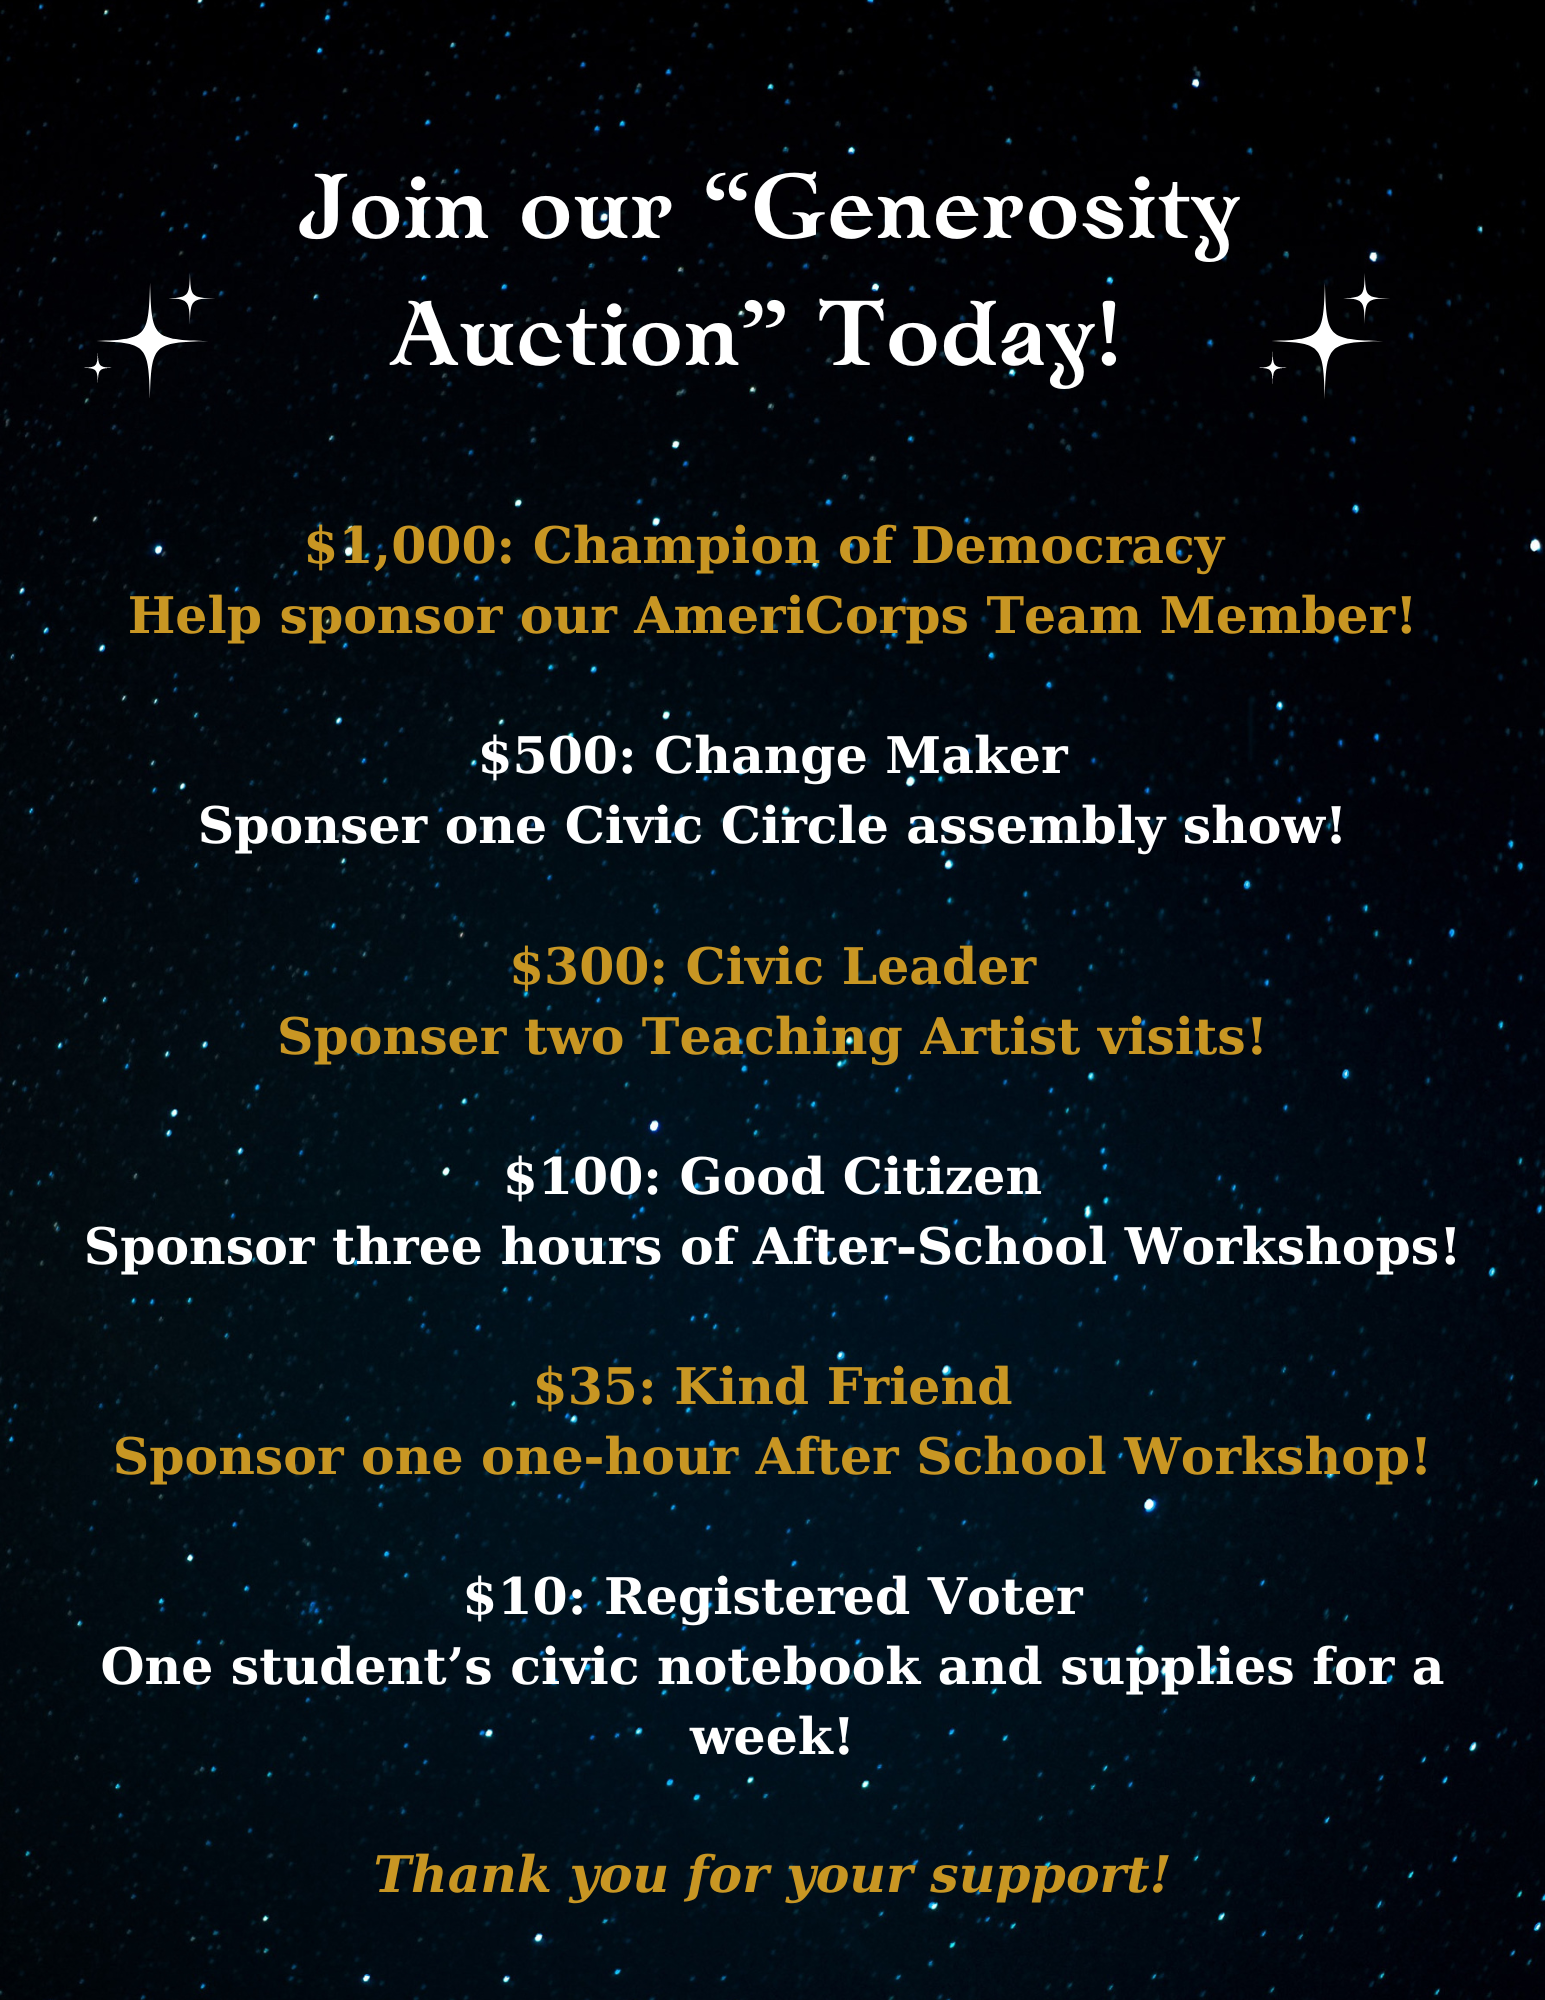 Join our "Generosity Auction" today! $1000 (Champion of Democracy) - Help sponsor our AmeriCorps Team Member! $500 (Change Maker) - Sponsor one Civic Circle assembly show! $300 (Civic Leader) - Sponsor two Teaching Artist visits! $100 (Good Citizen) - Sponsor three hours of After-School Workshops! $35 (Good Citizen) - Sponsor three hours of After-School Workshops! $35 (Kind Friend) - Sponsor one one-hour After School Workshop! $10 (Registered Voter) - One student's civic notebook and supplies for a week! Thank you for your support!